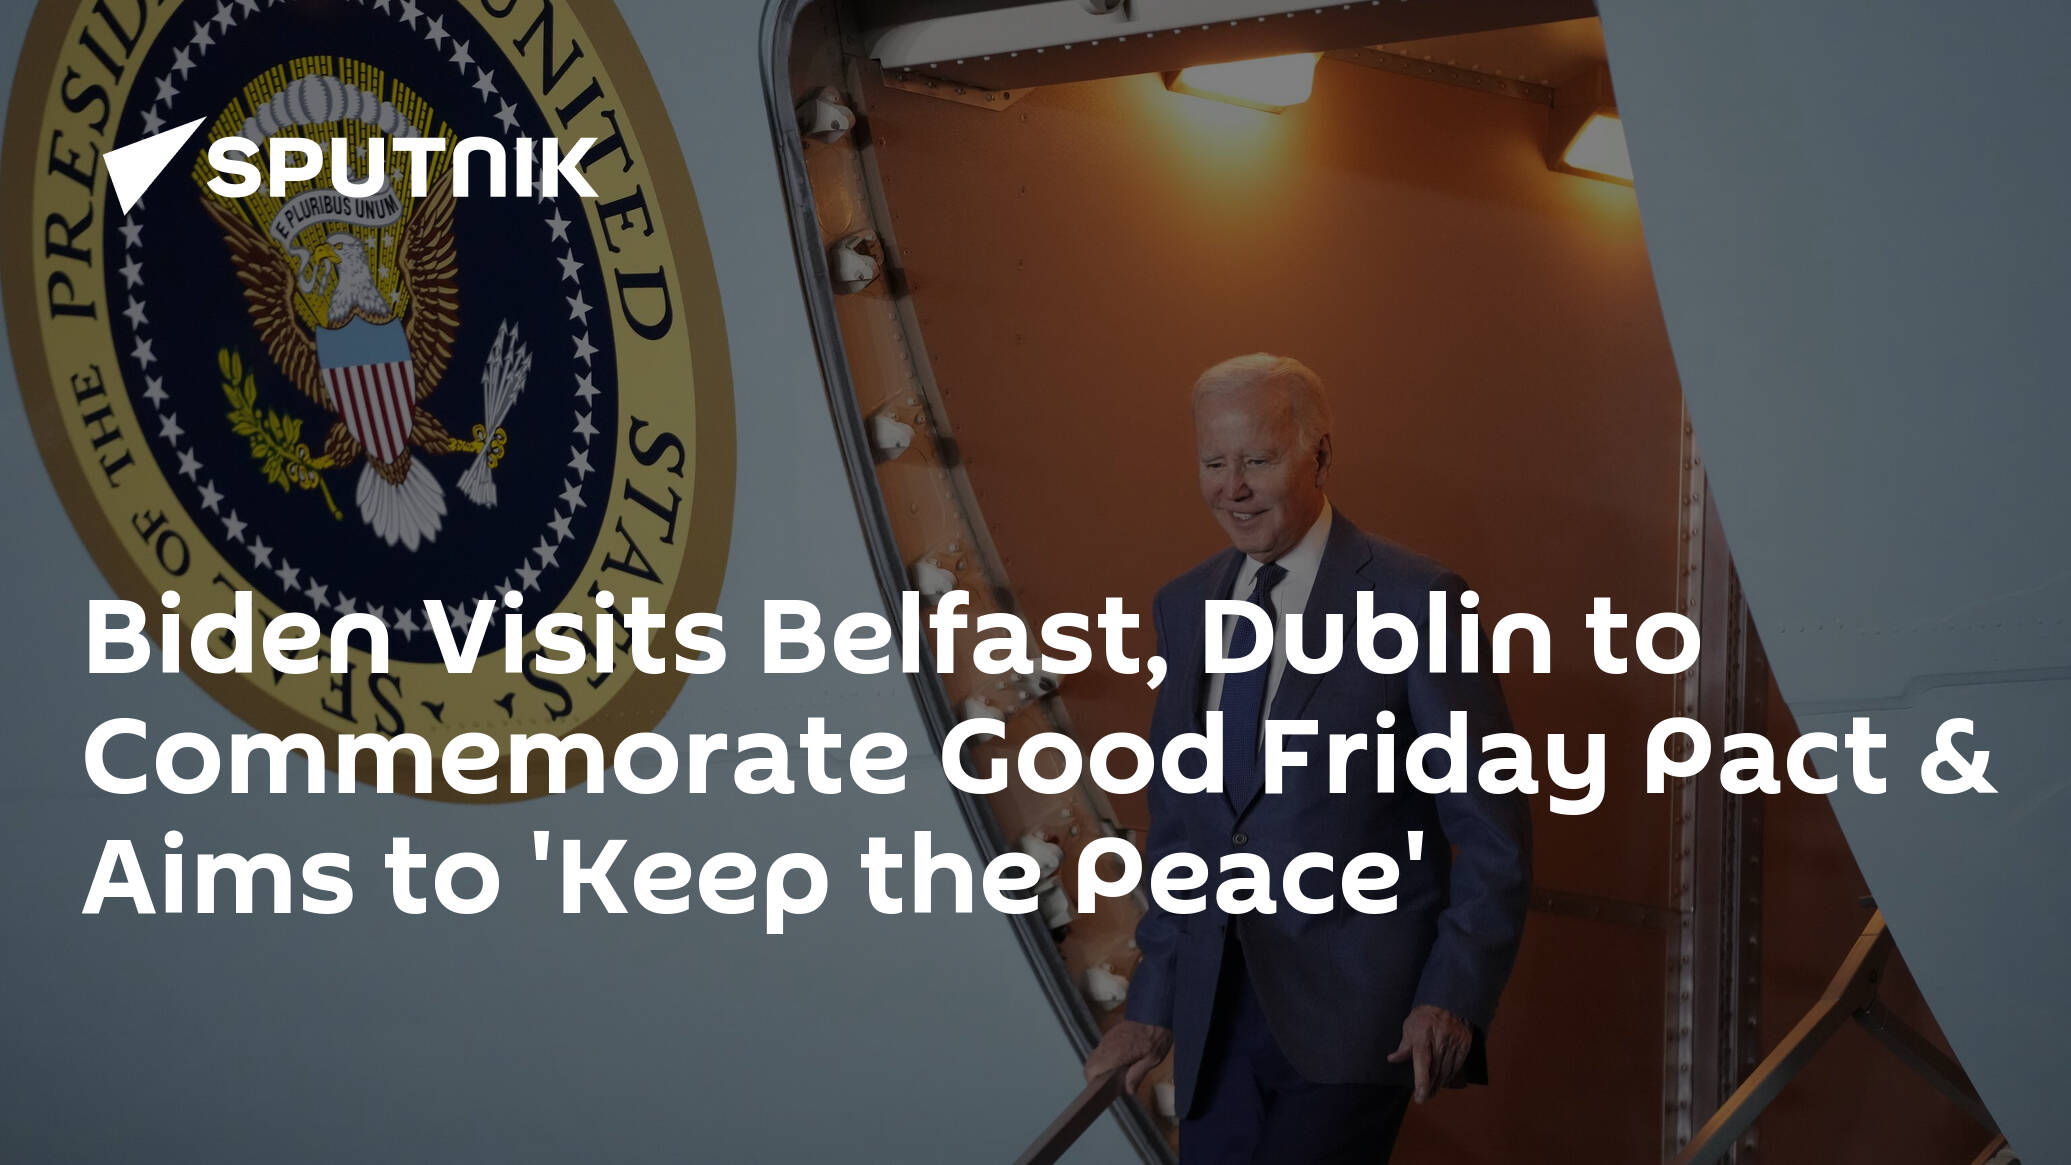 Biden Visits Belfast, Dublin to Commemorate Good Friday Pact & Aims to 'Keep the Peace'